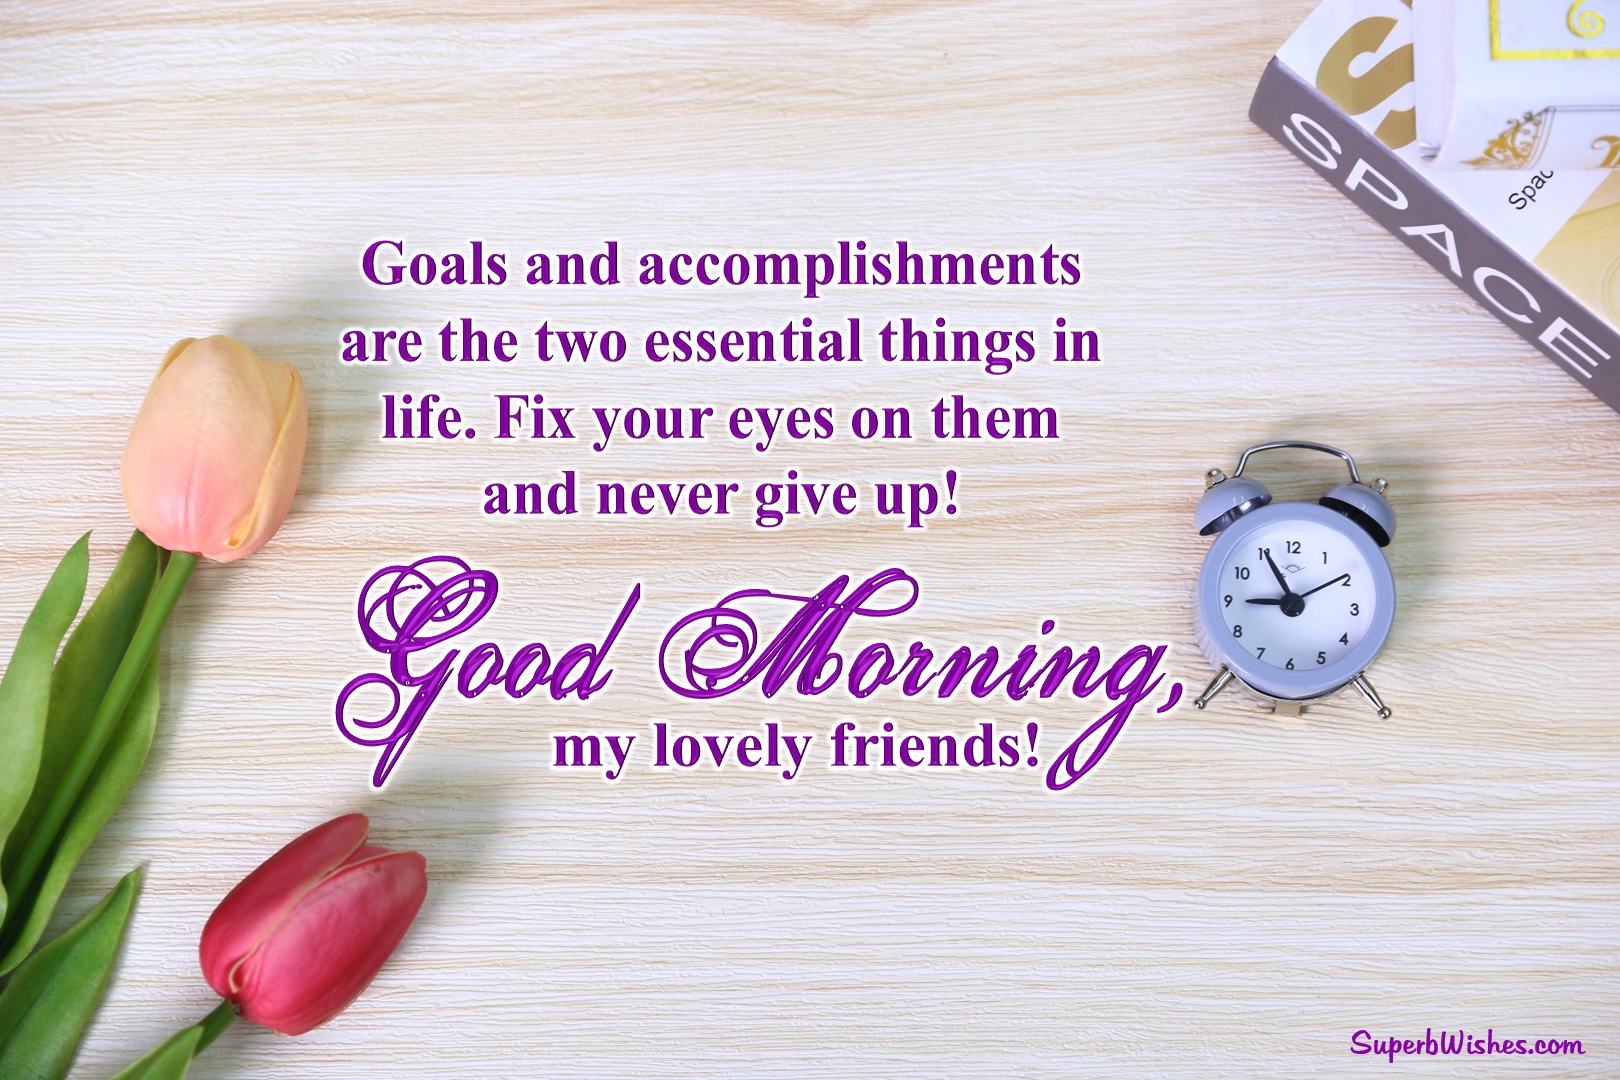 Good Morning Wishes For Friends Images - Fix Your Goals | SuperbWishes